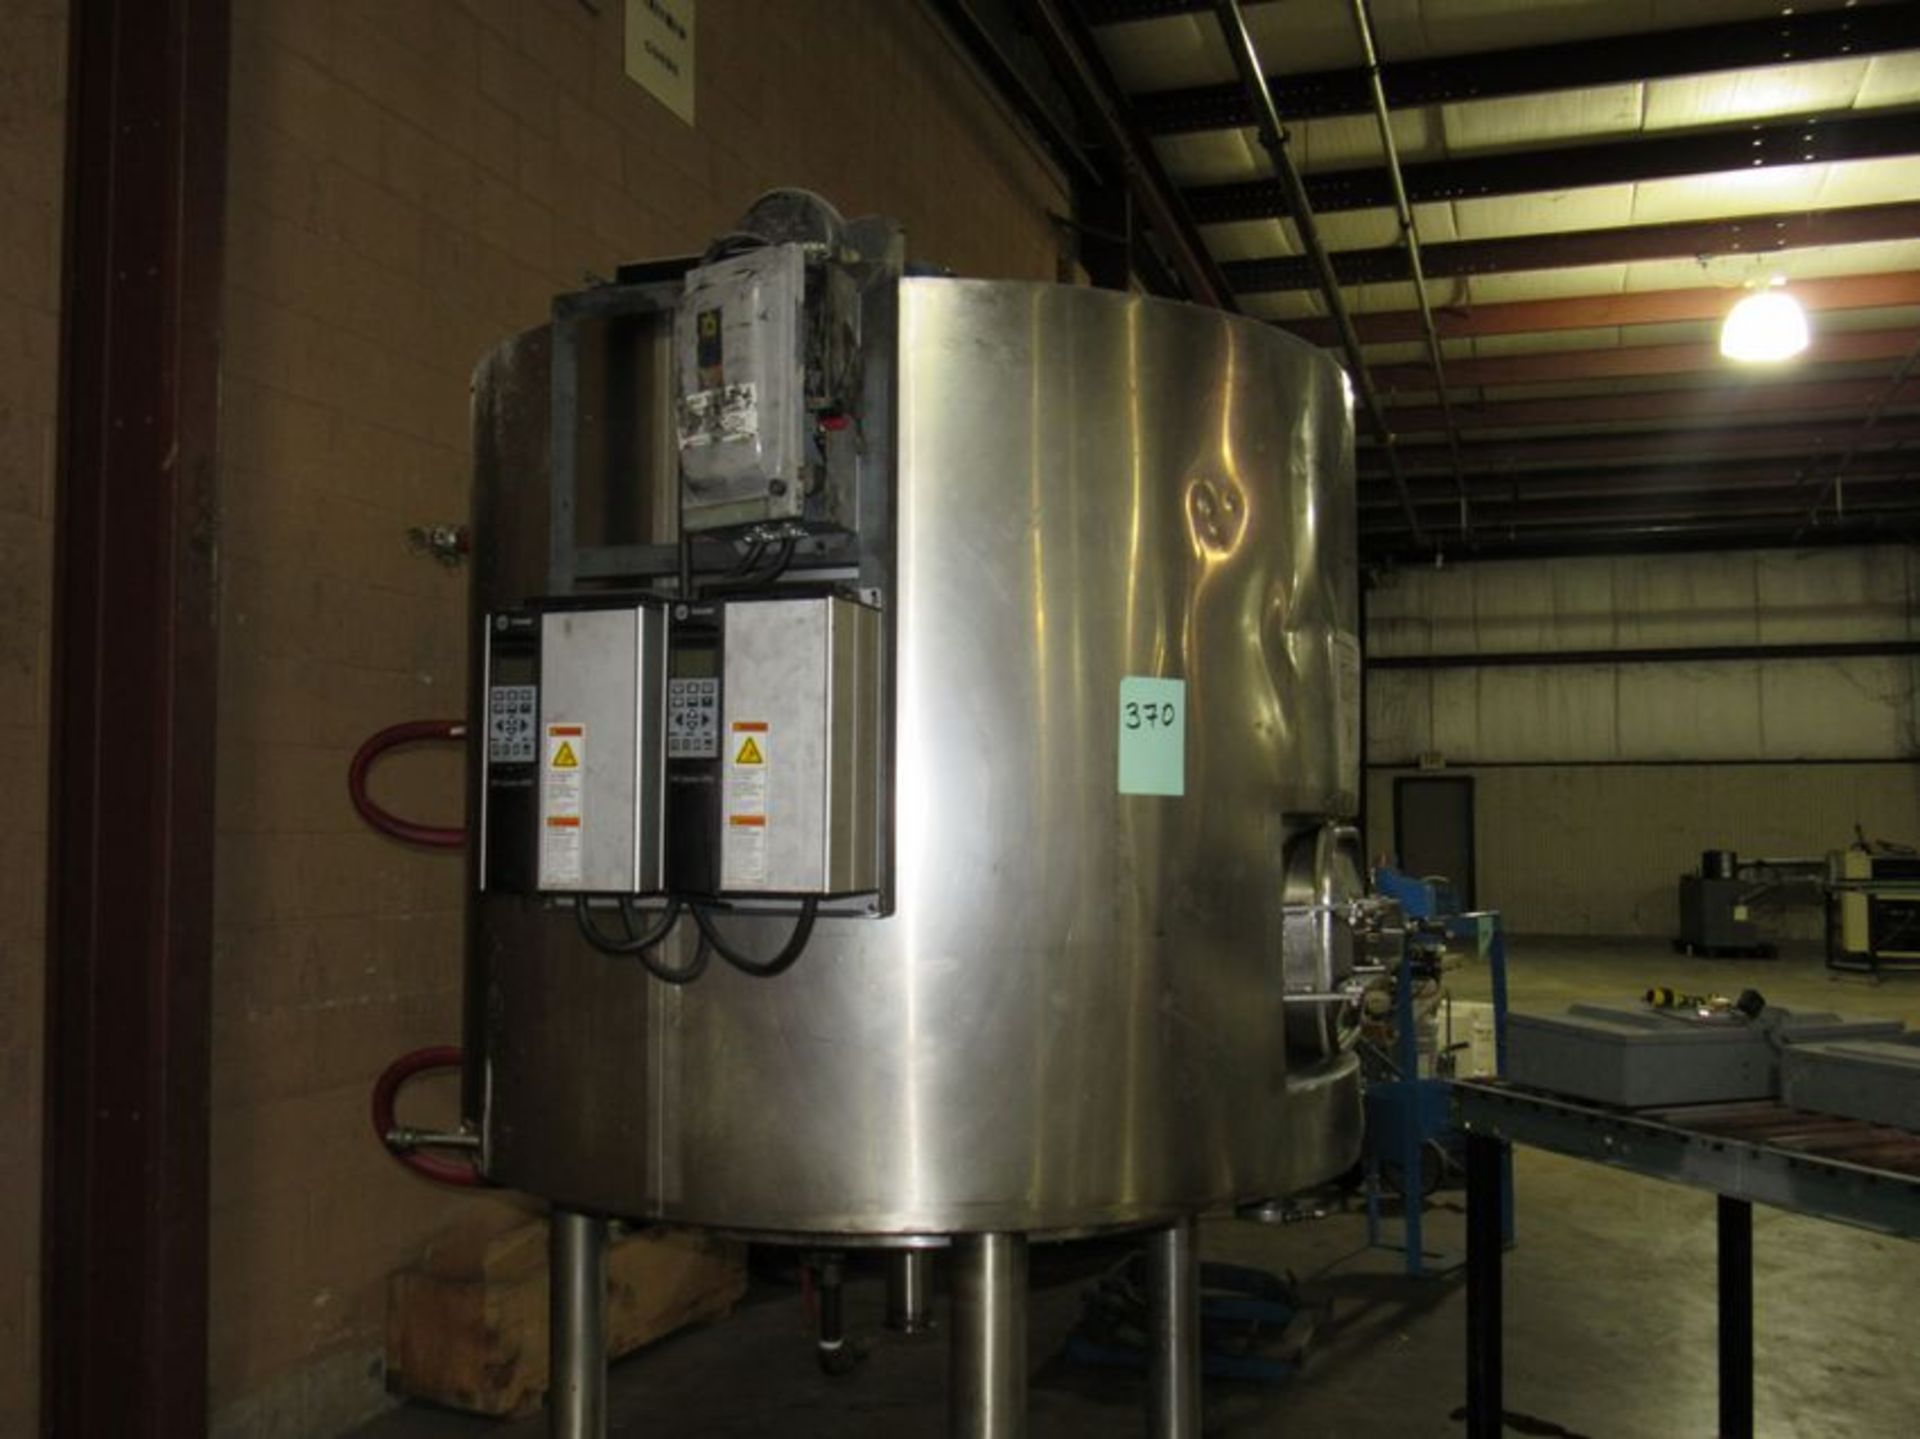 1500 liter food grade stainless steel jacketed tank in great condition. Inside approx. 4ft ft. dia - Image 2 of 11